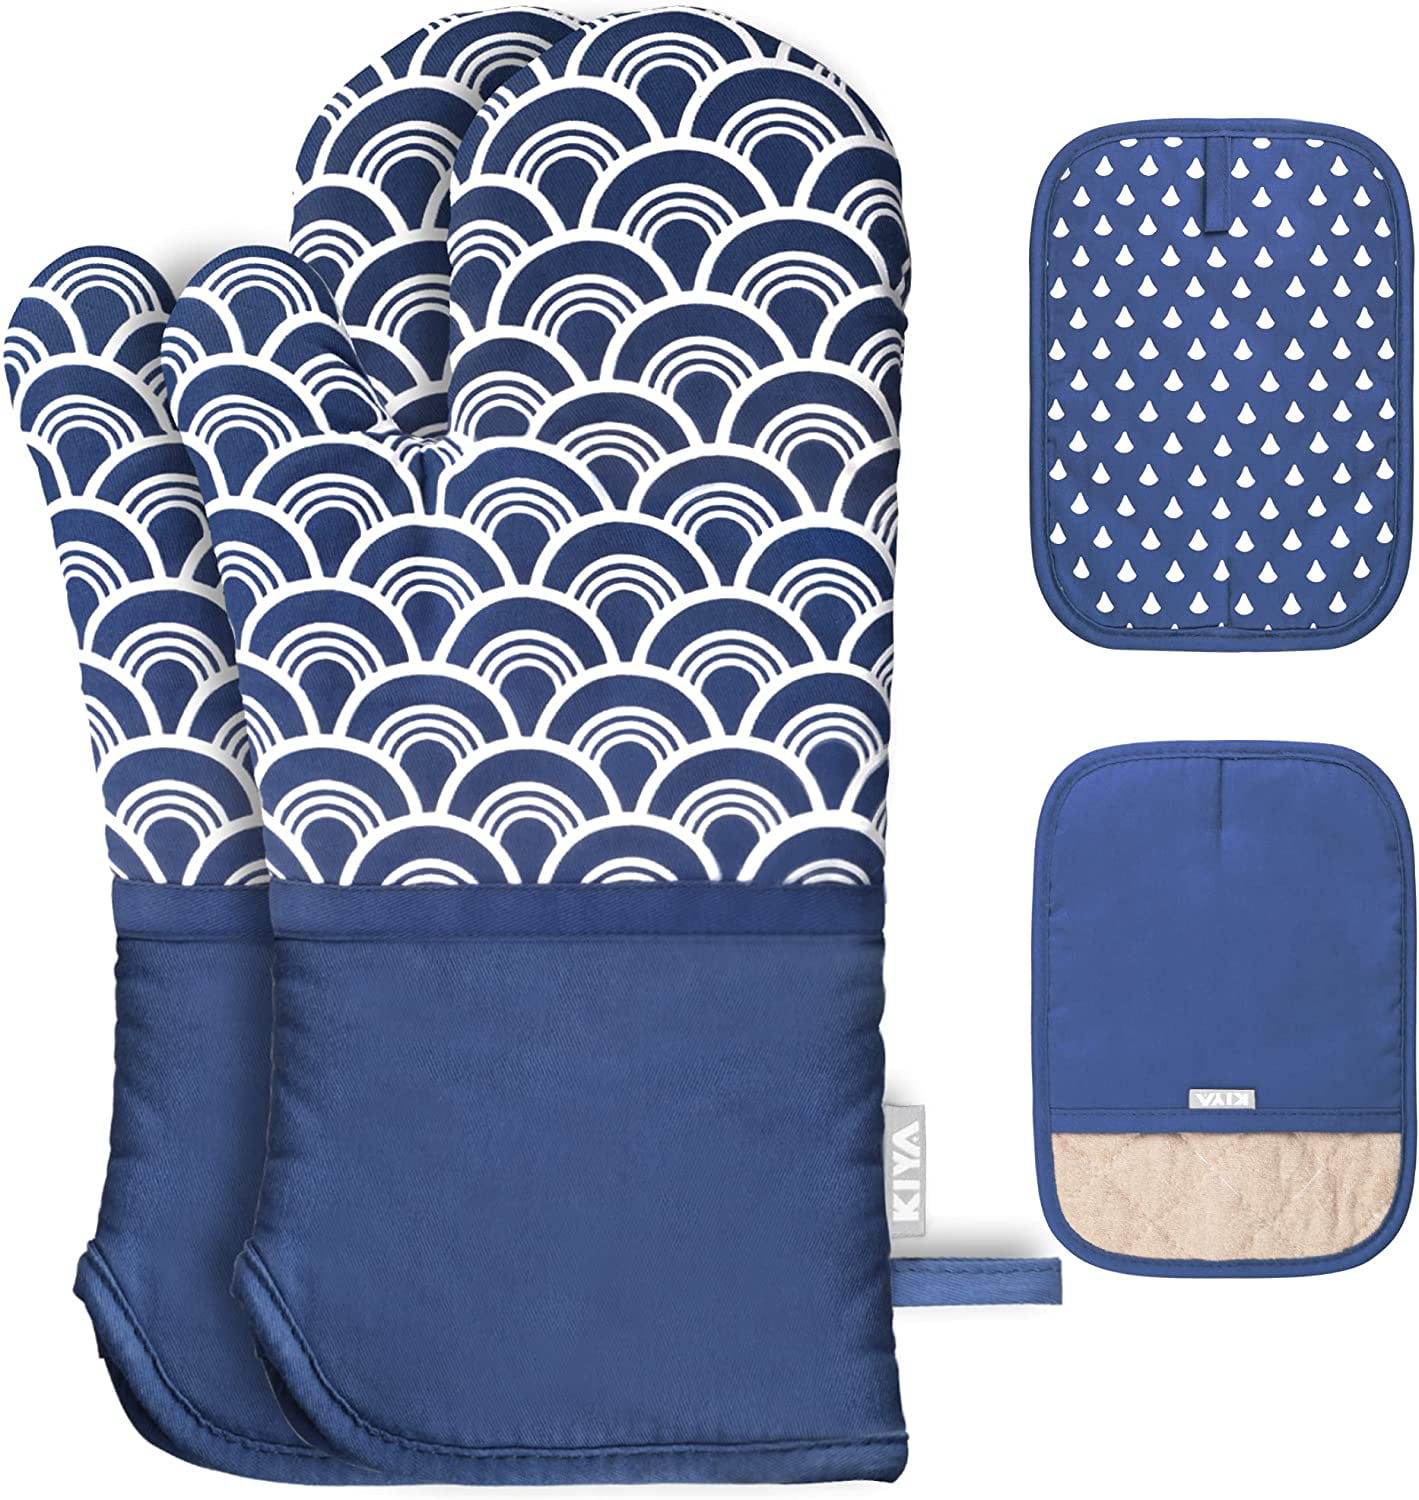 Heat Resistant Oven Gloves with 100% Cotton Non-Slip Silicone for Cooking Baking Grilling KIYA Oven Mitts Sets … 2-Piece Sets Blue 